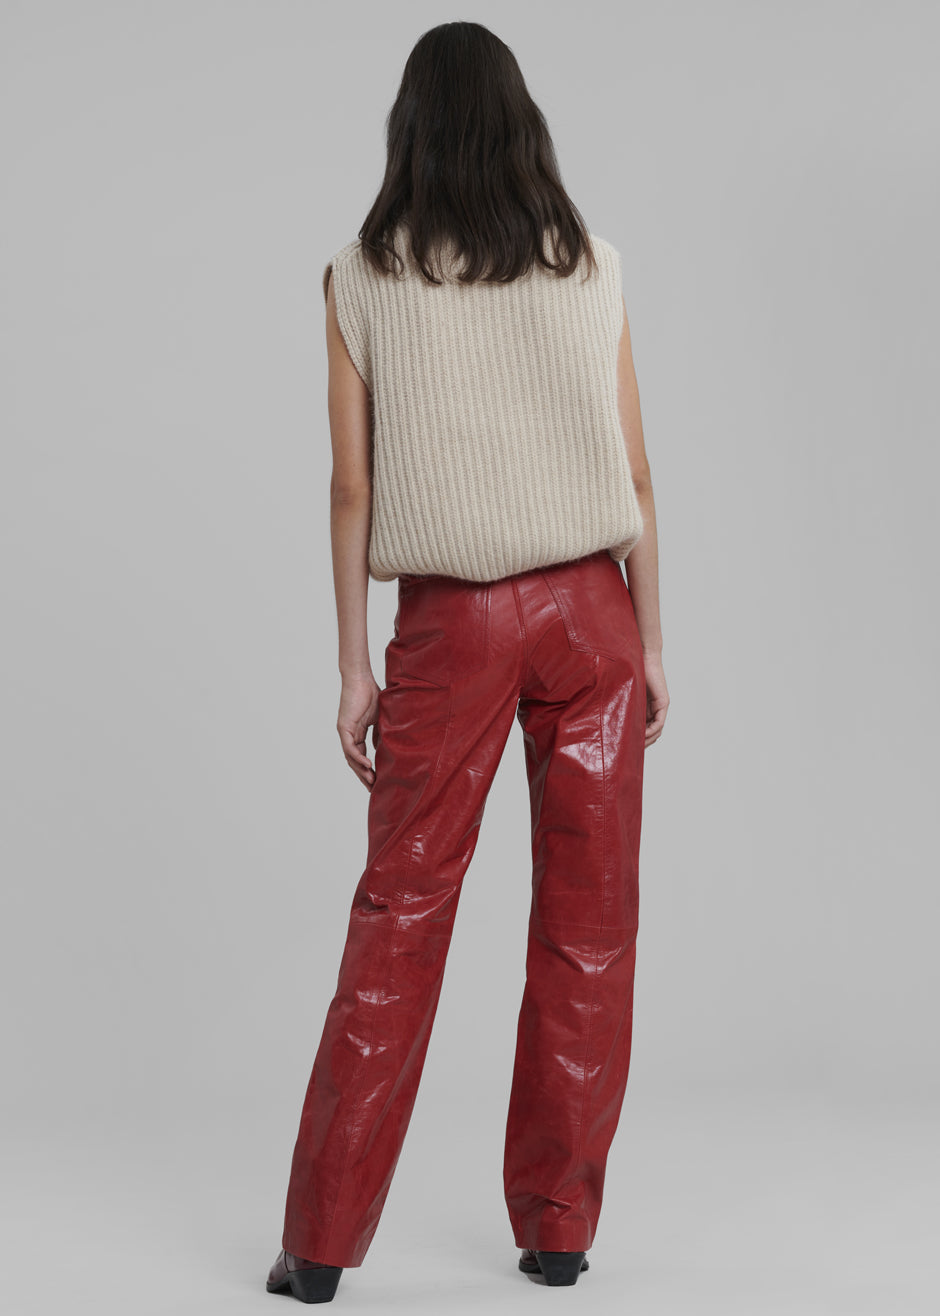 REMAIN Pants Crunchy Leather - Chili Pepper - 10